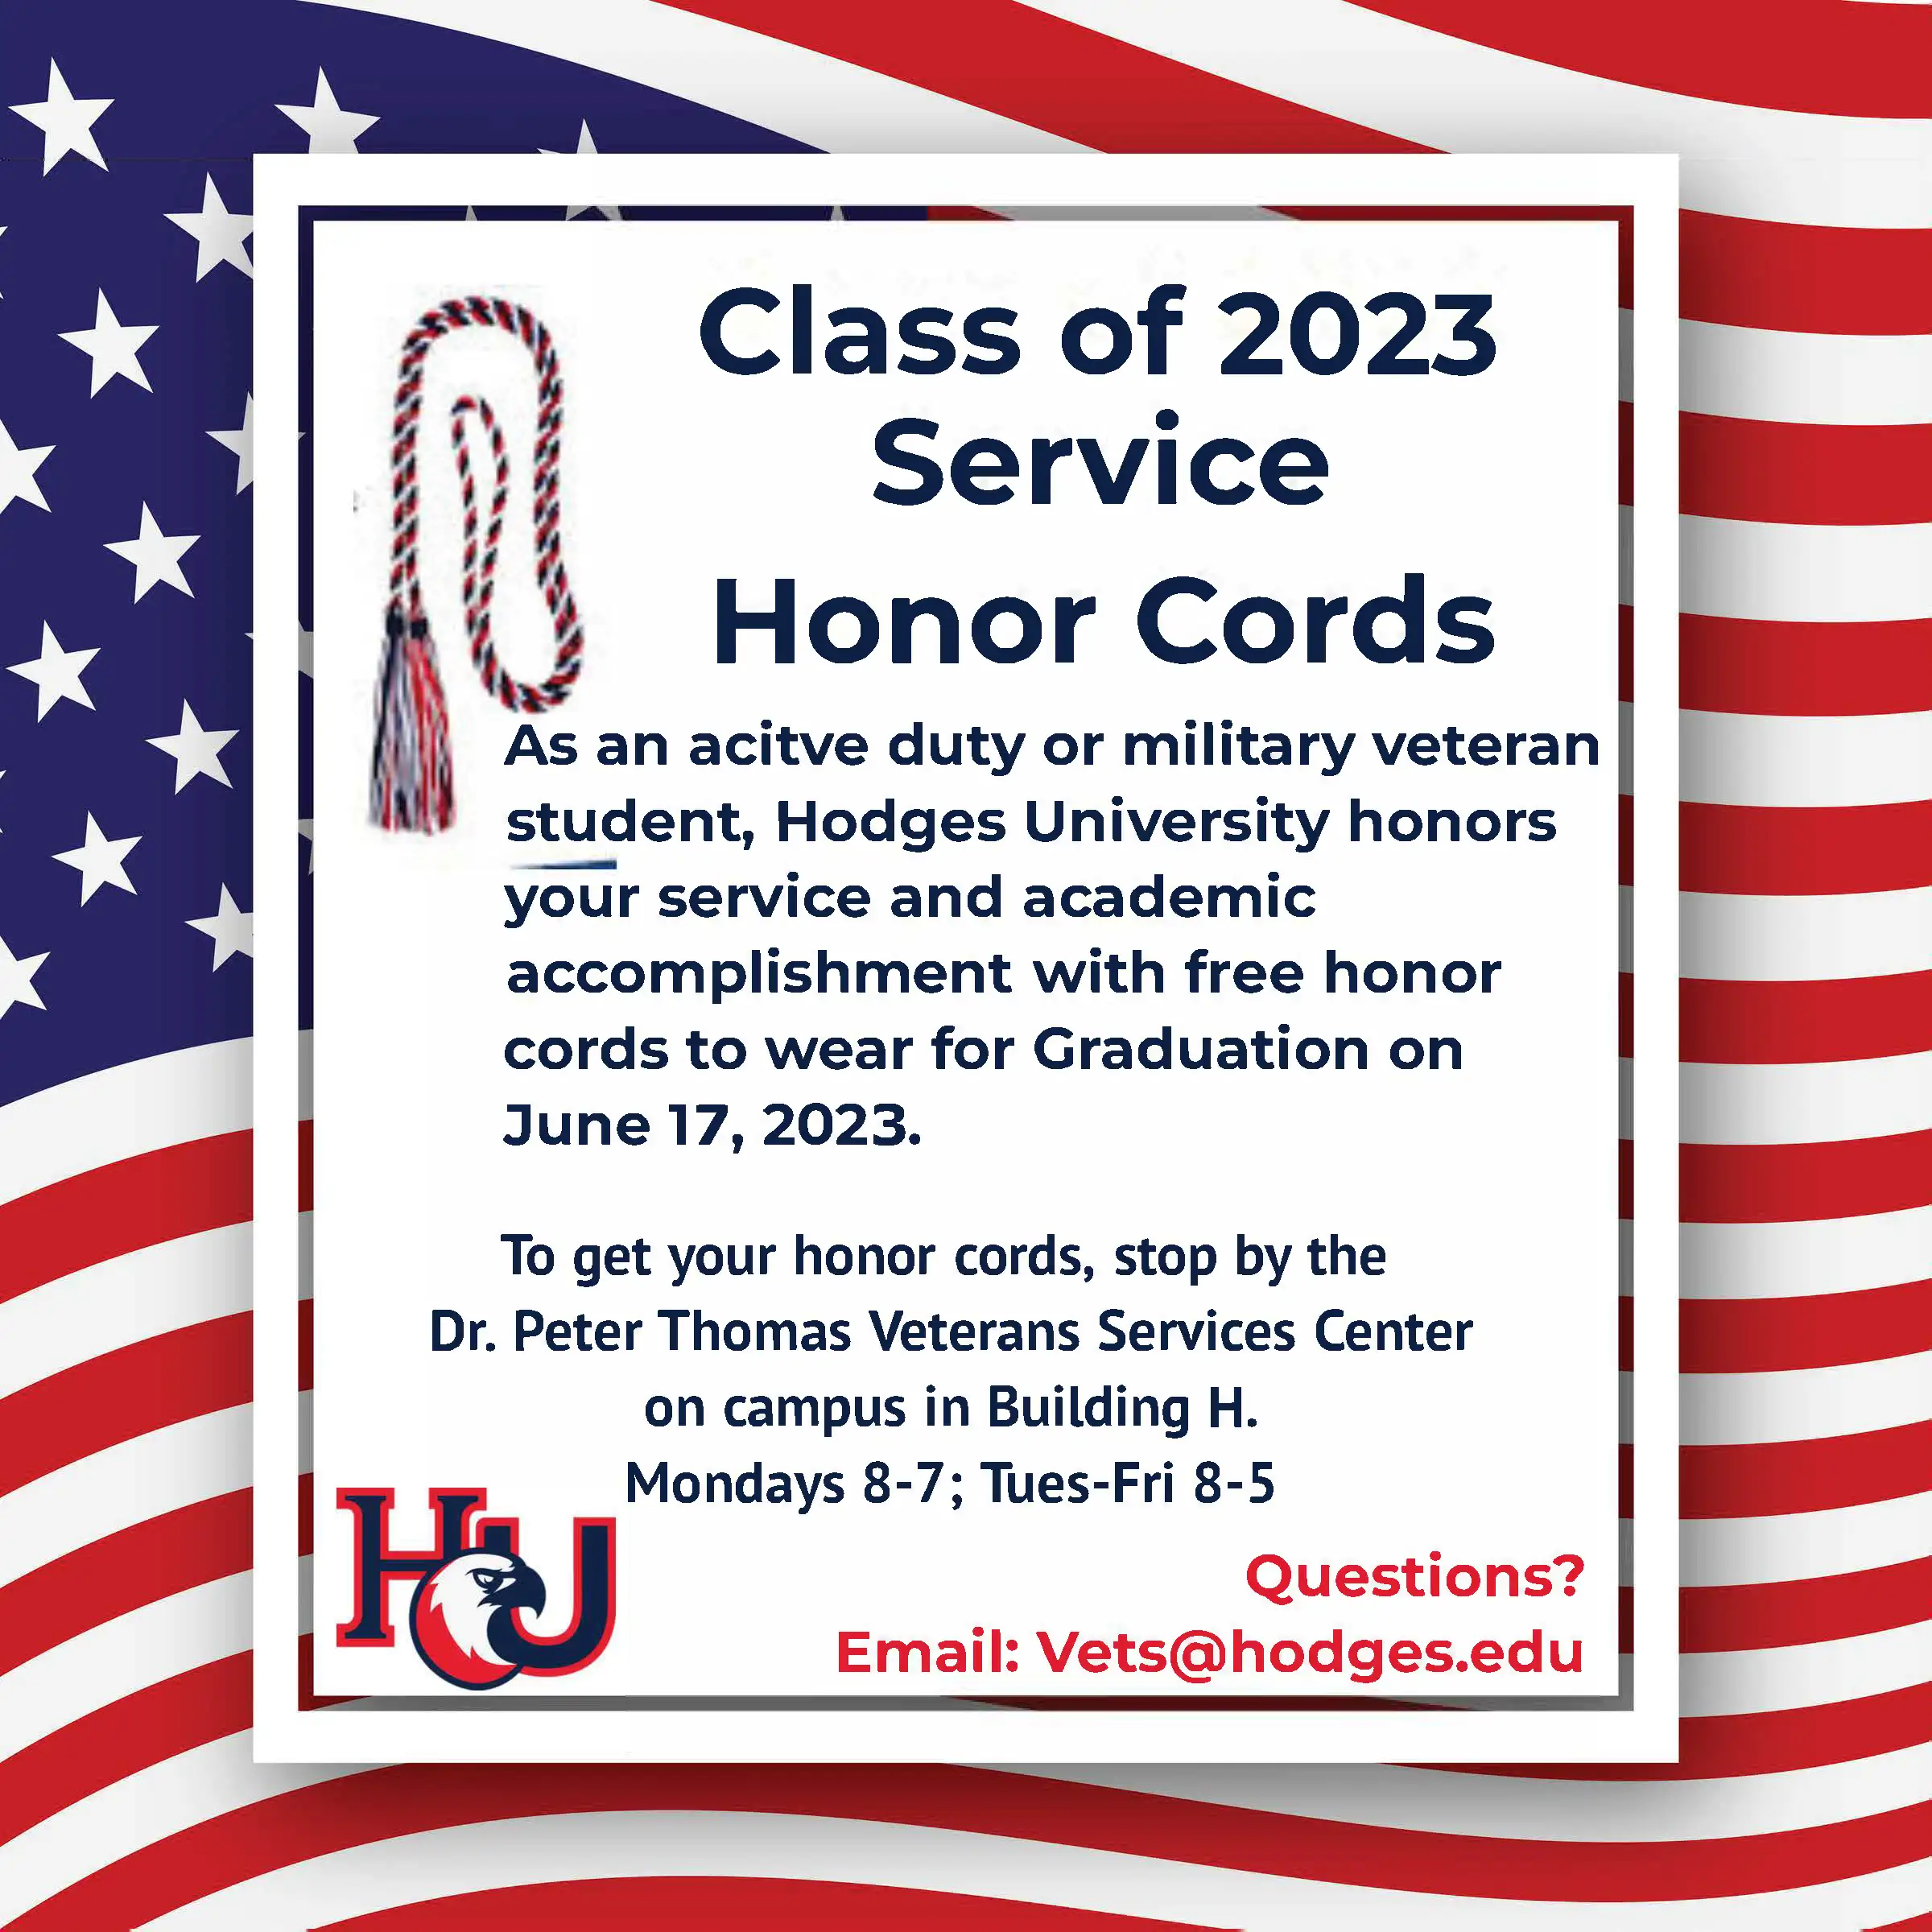 Remember to get your veteran honors cords